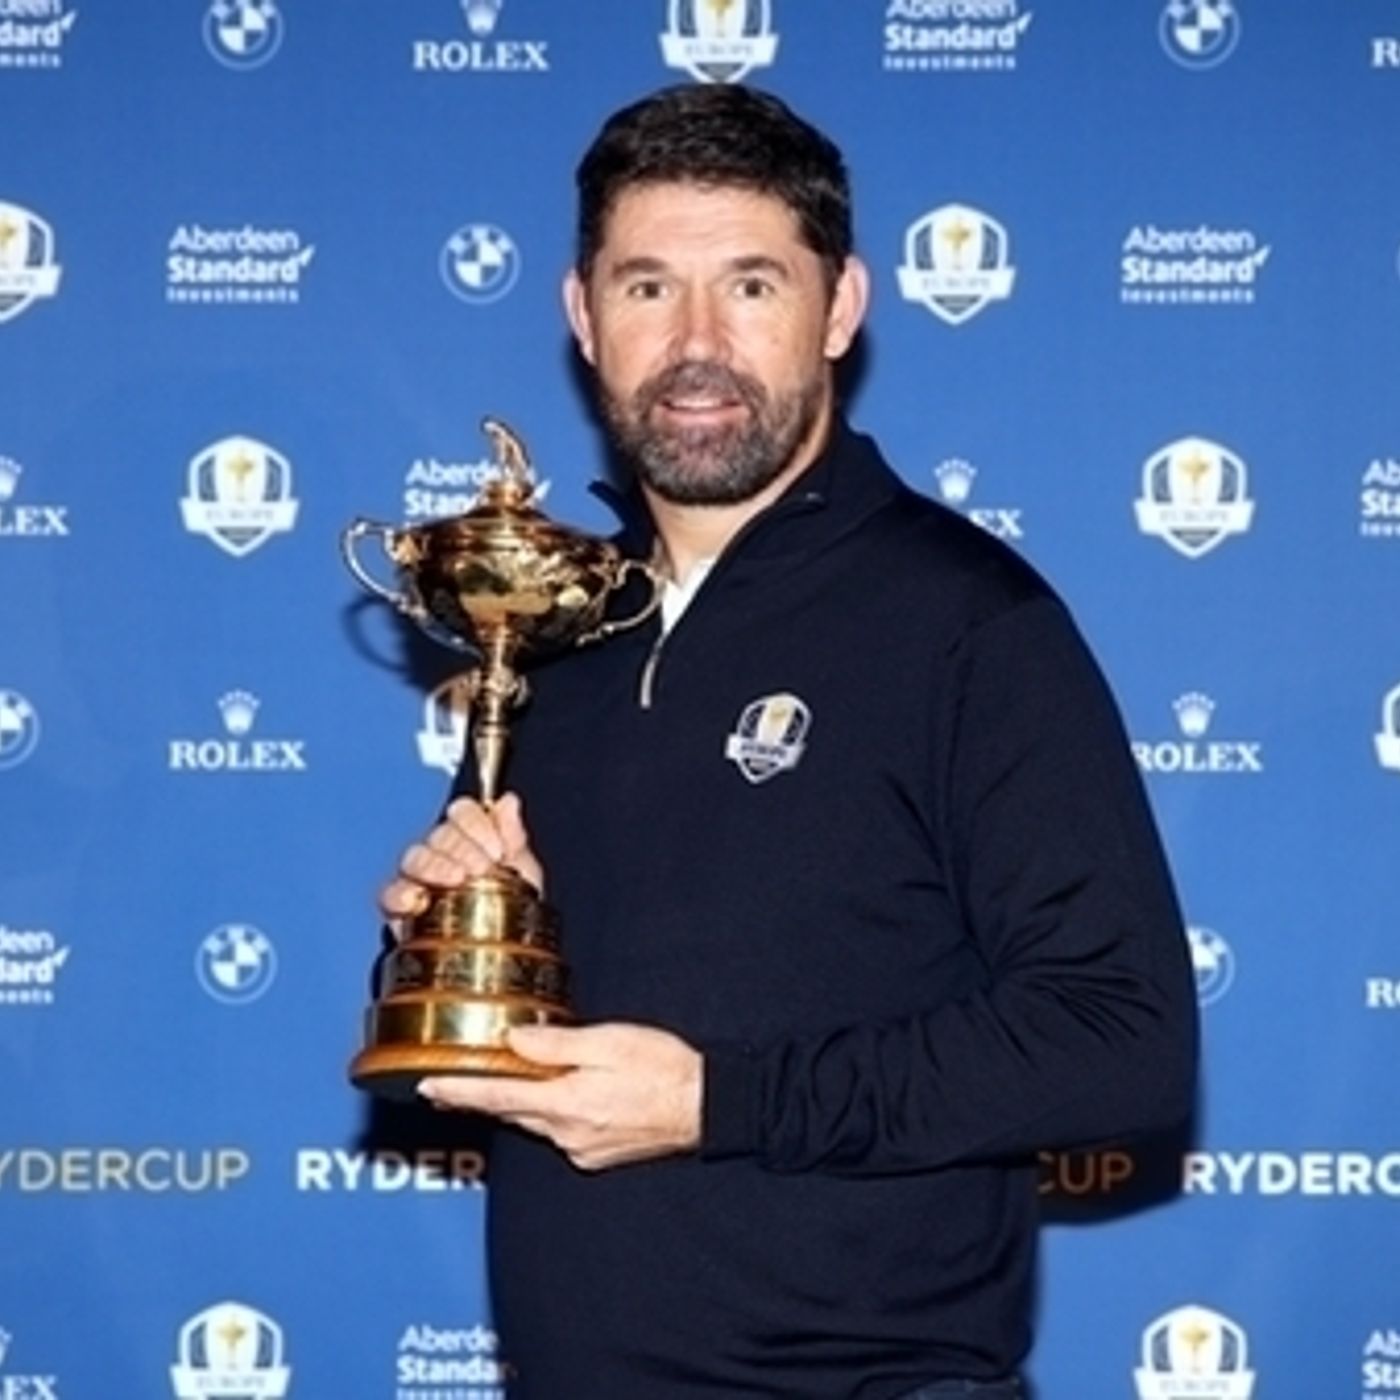 William Hill Golf Podcast: Ryder Cup 2021